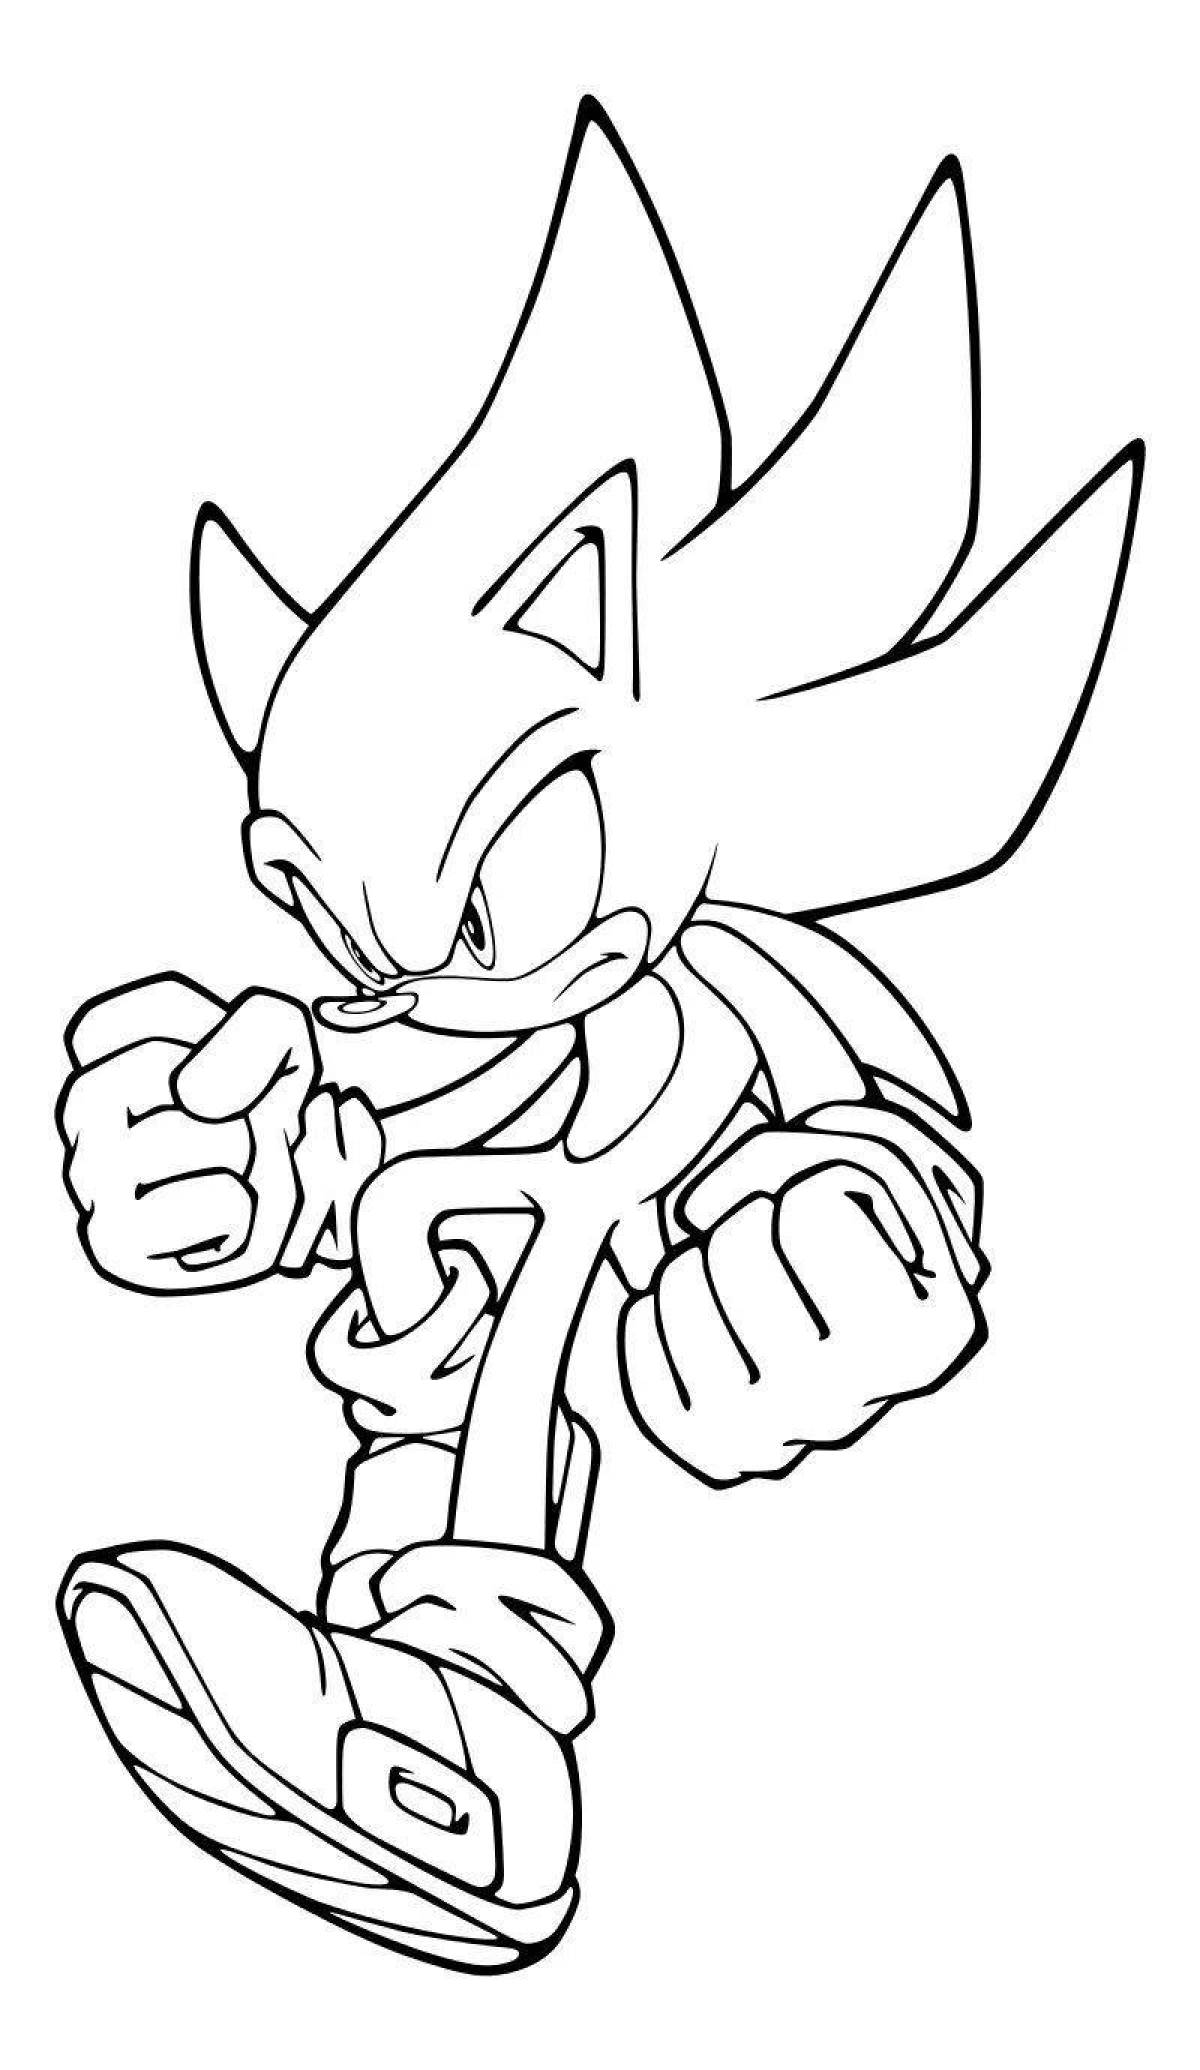 Sonic seal awesome coloring book